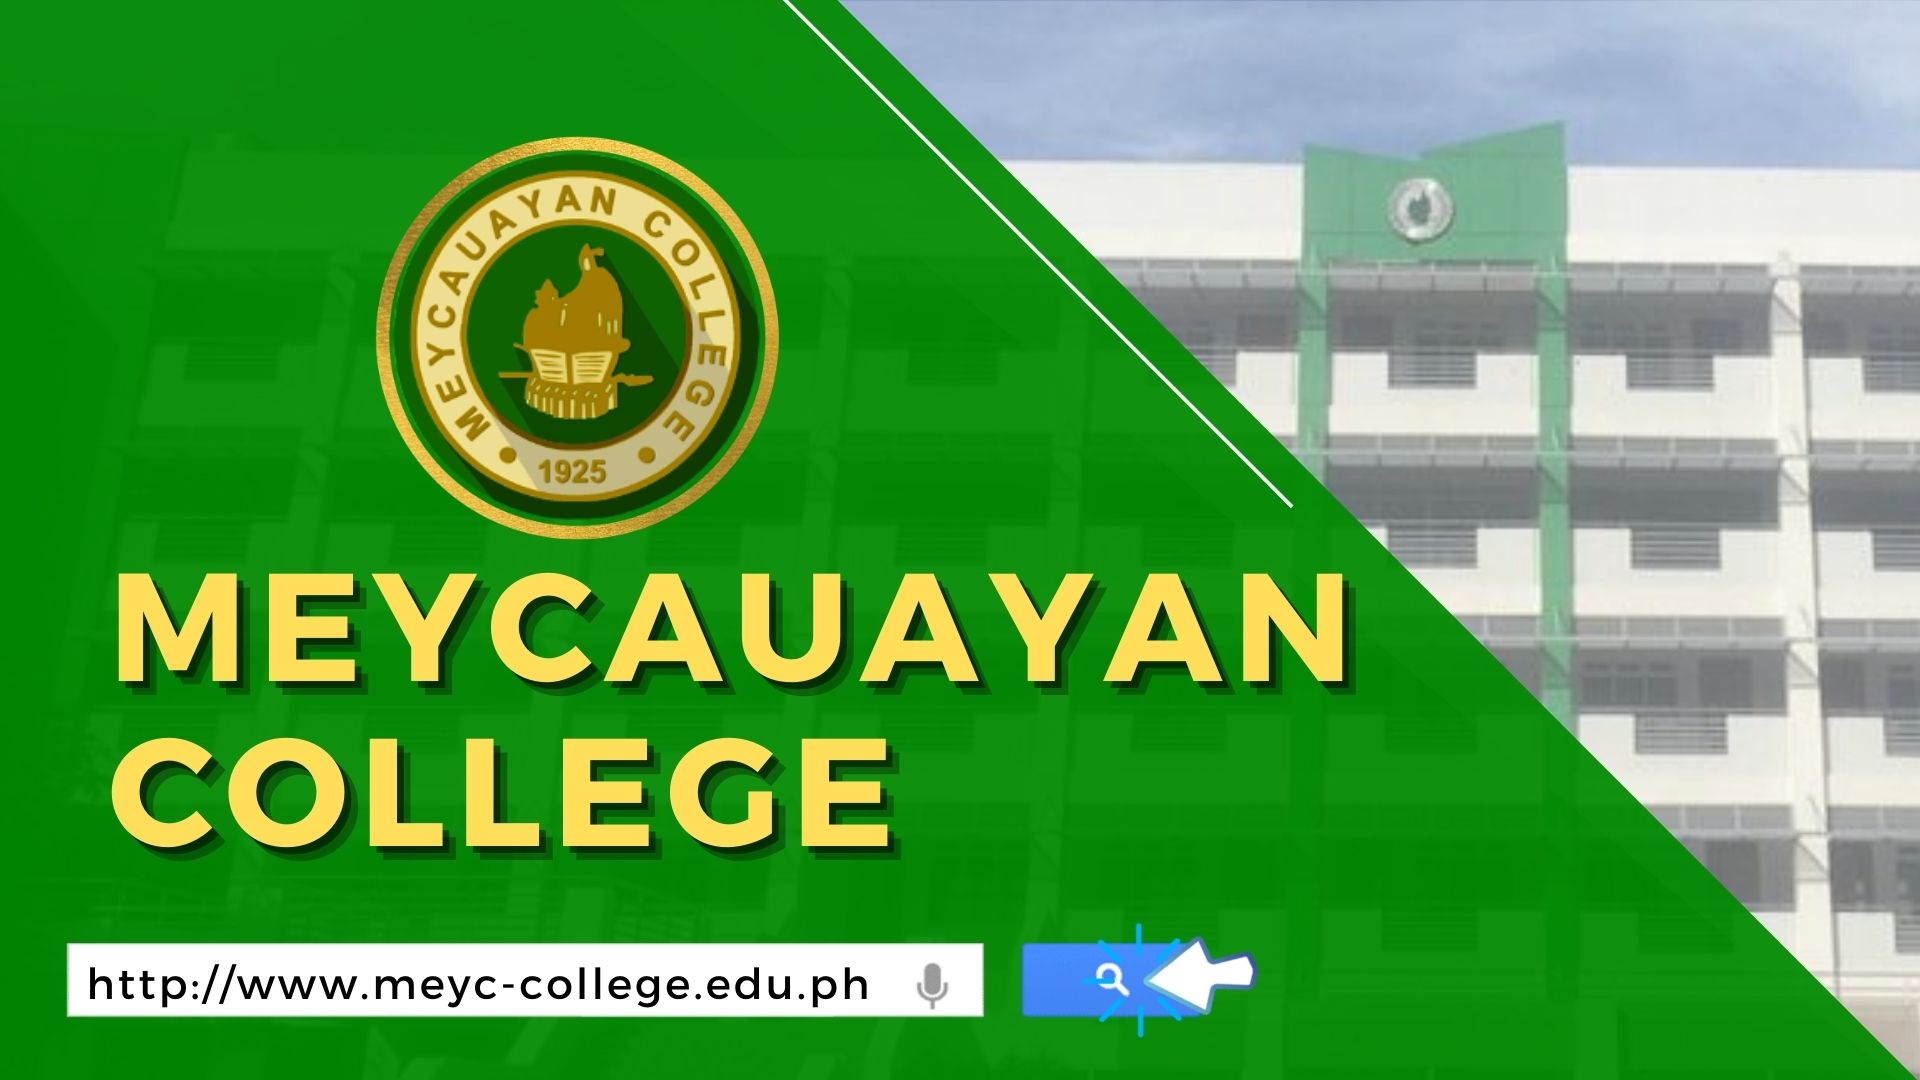 Welcome to Meycauayan College School Year 2020-2021!